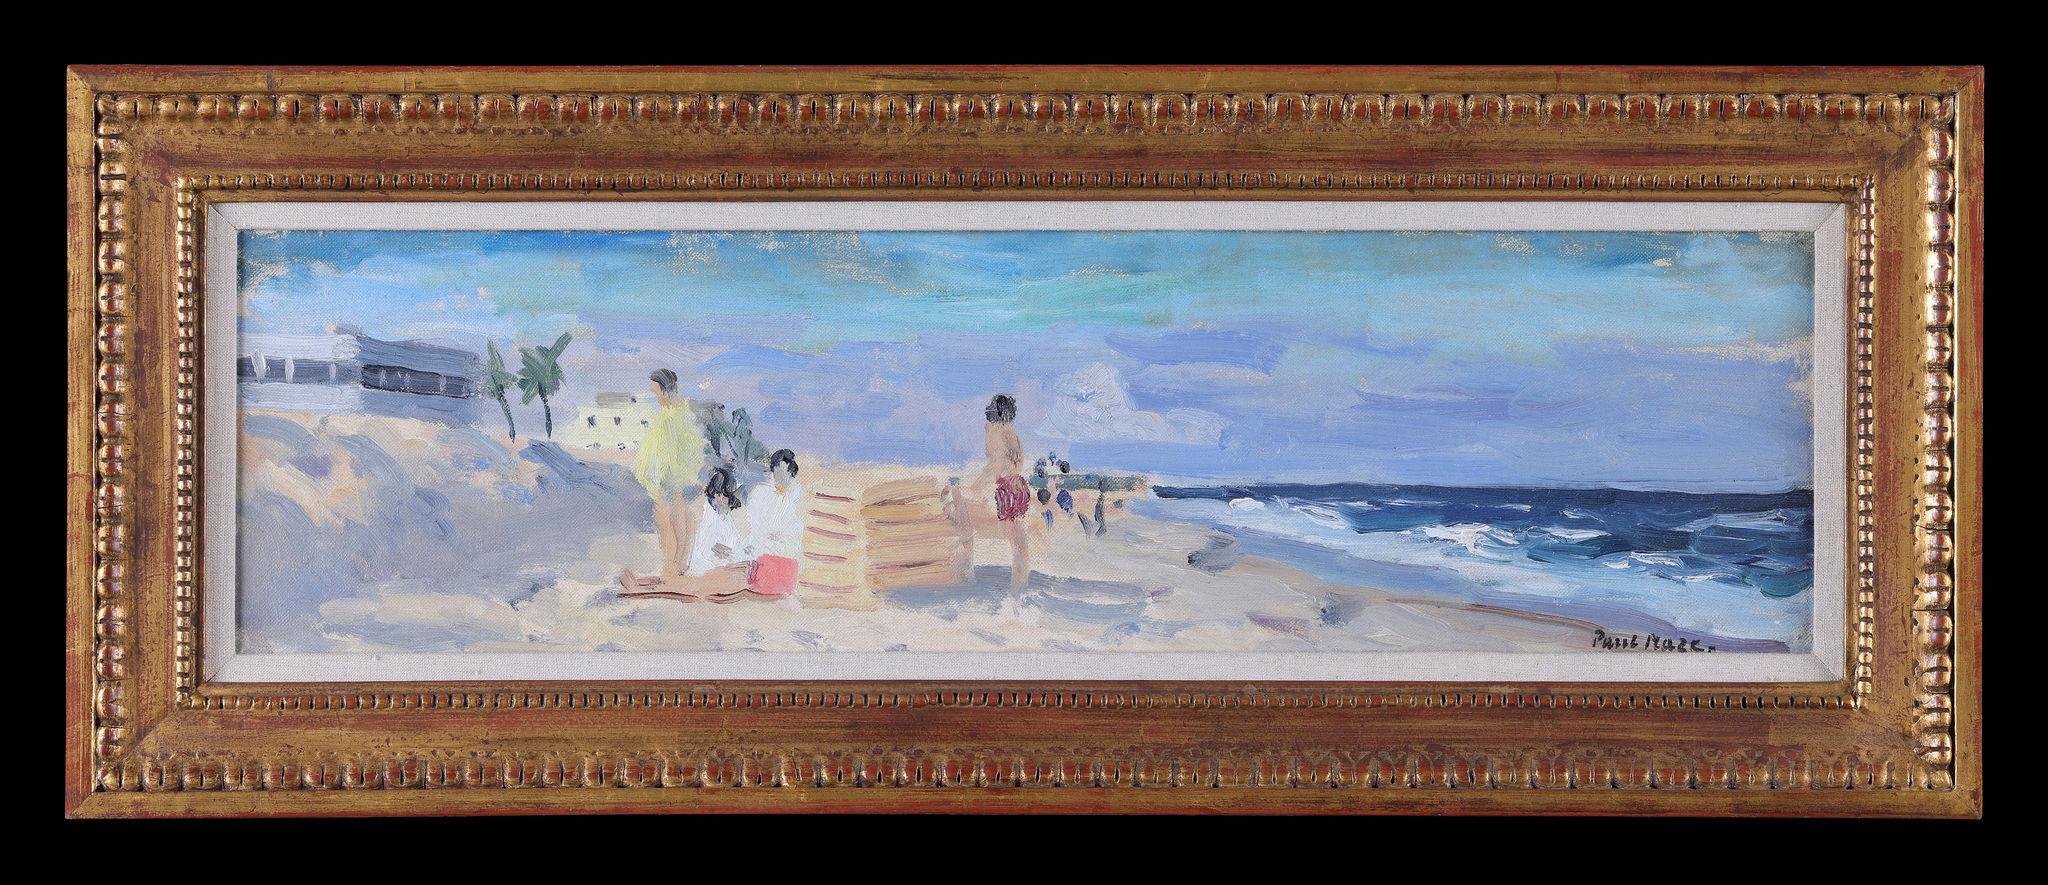 'Children on the Beach, Fisher Island USA'  Oil painting on board - Painting by Paul Maze